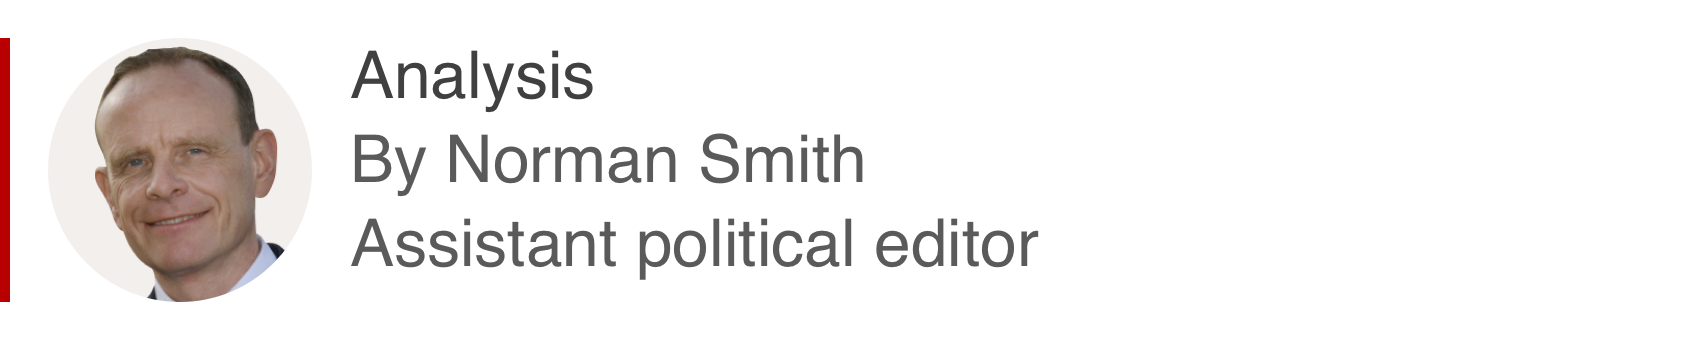 Analysis box by Norman Smith, assistant political editor